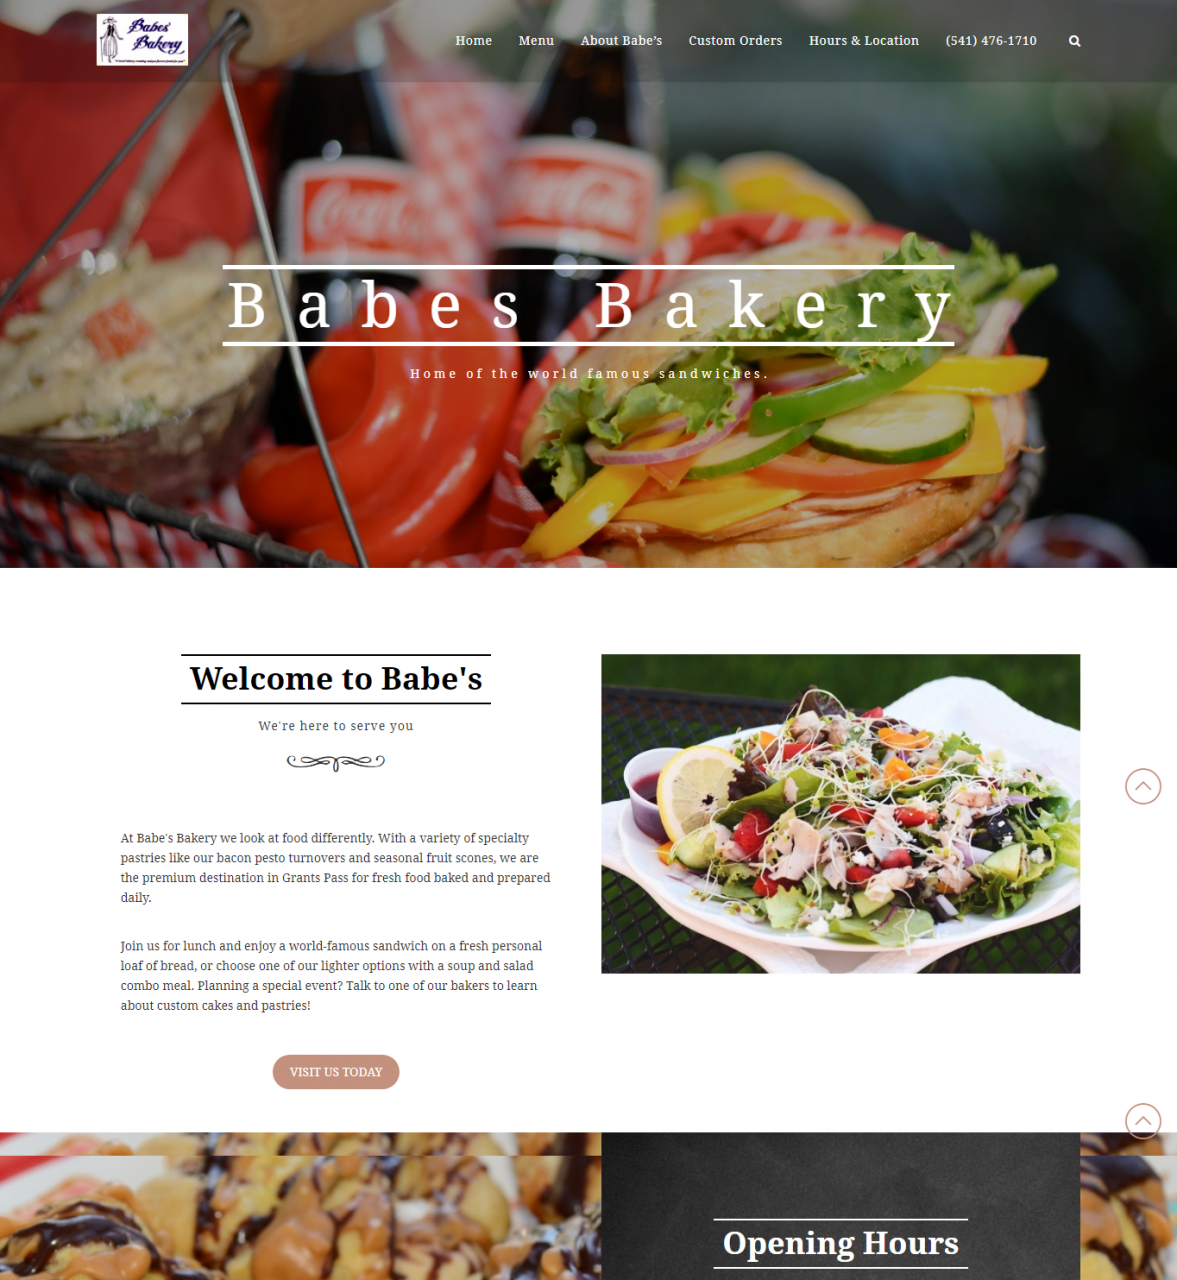 Babe’s Bakery was a new business that needed a site. They came to us and we created a custom design to match their needs. Platform: WordPress Goals: Consultation Website Creation